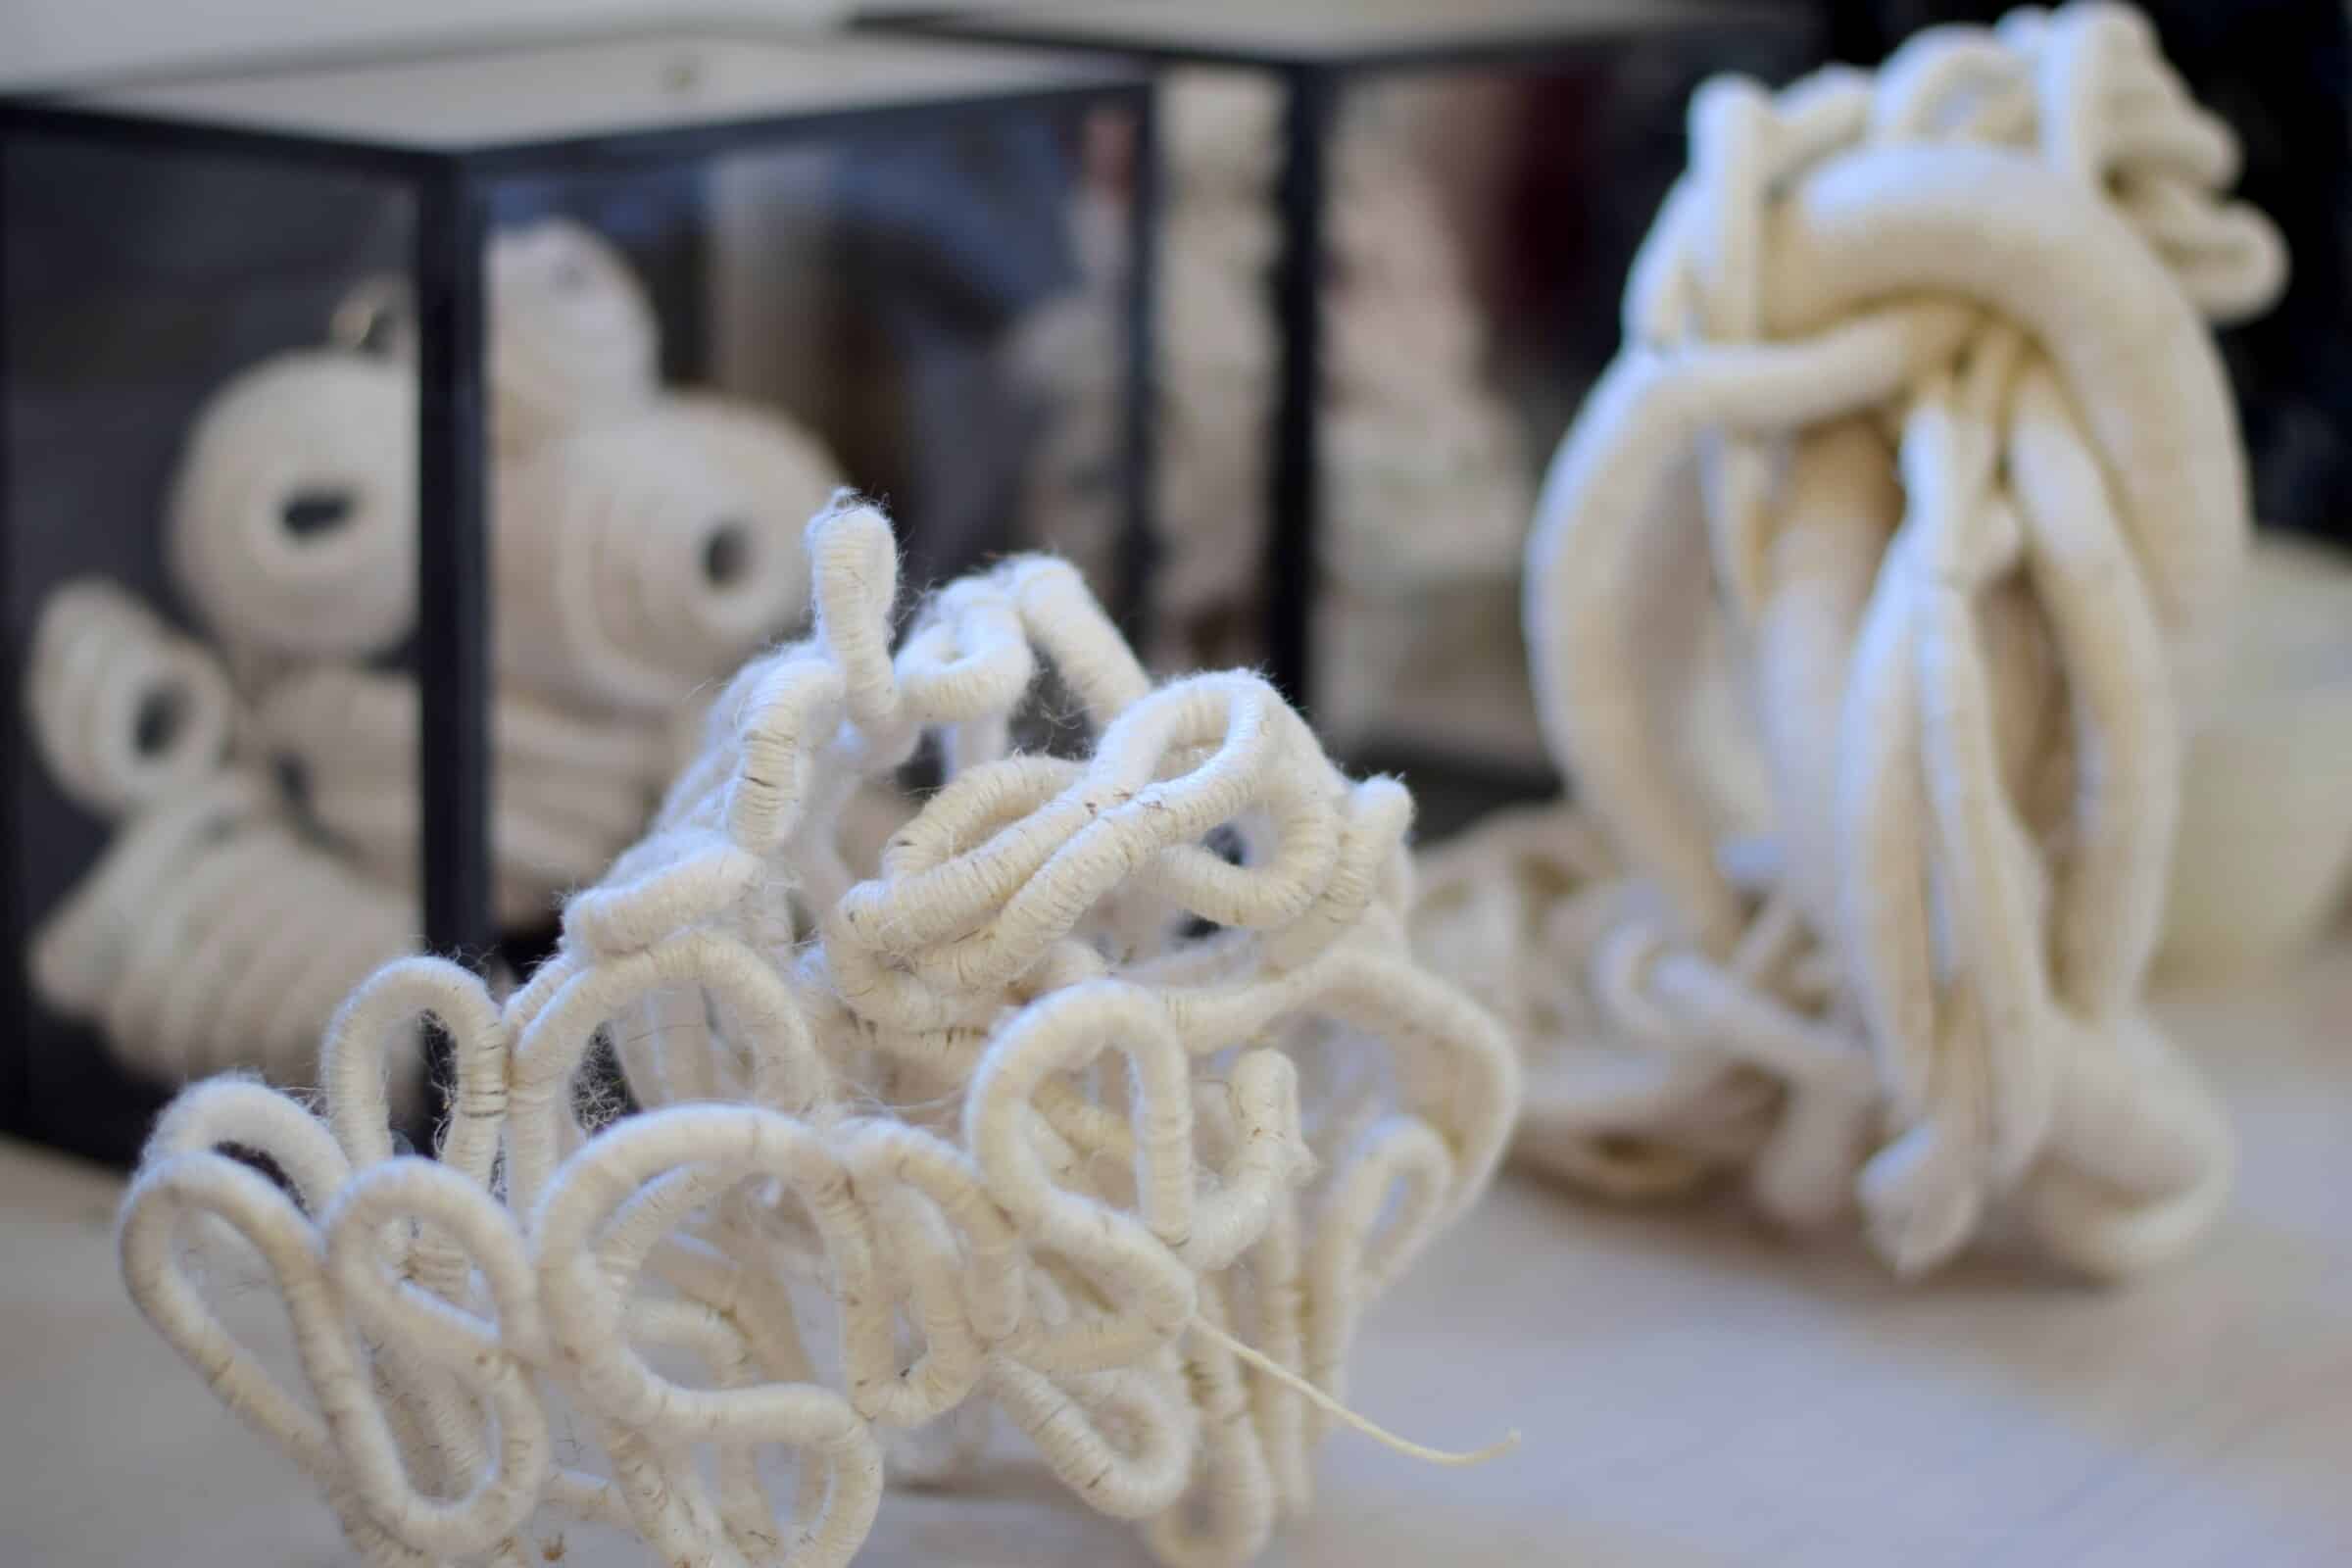 white coral looking sculptures by Aude Franjou